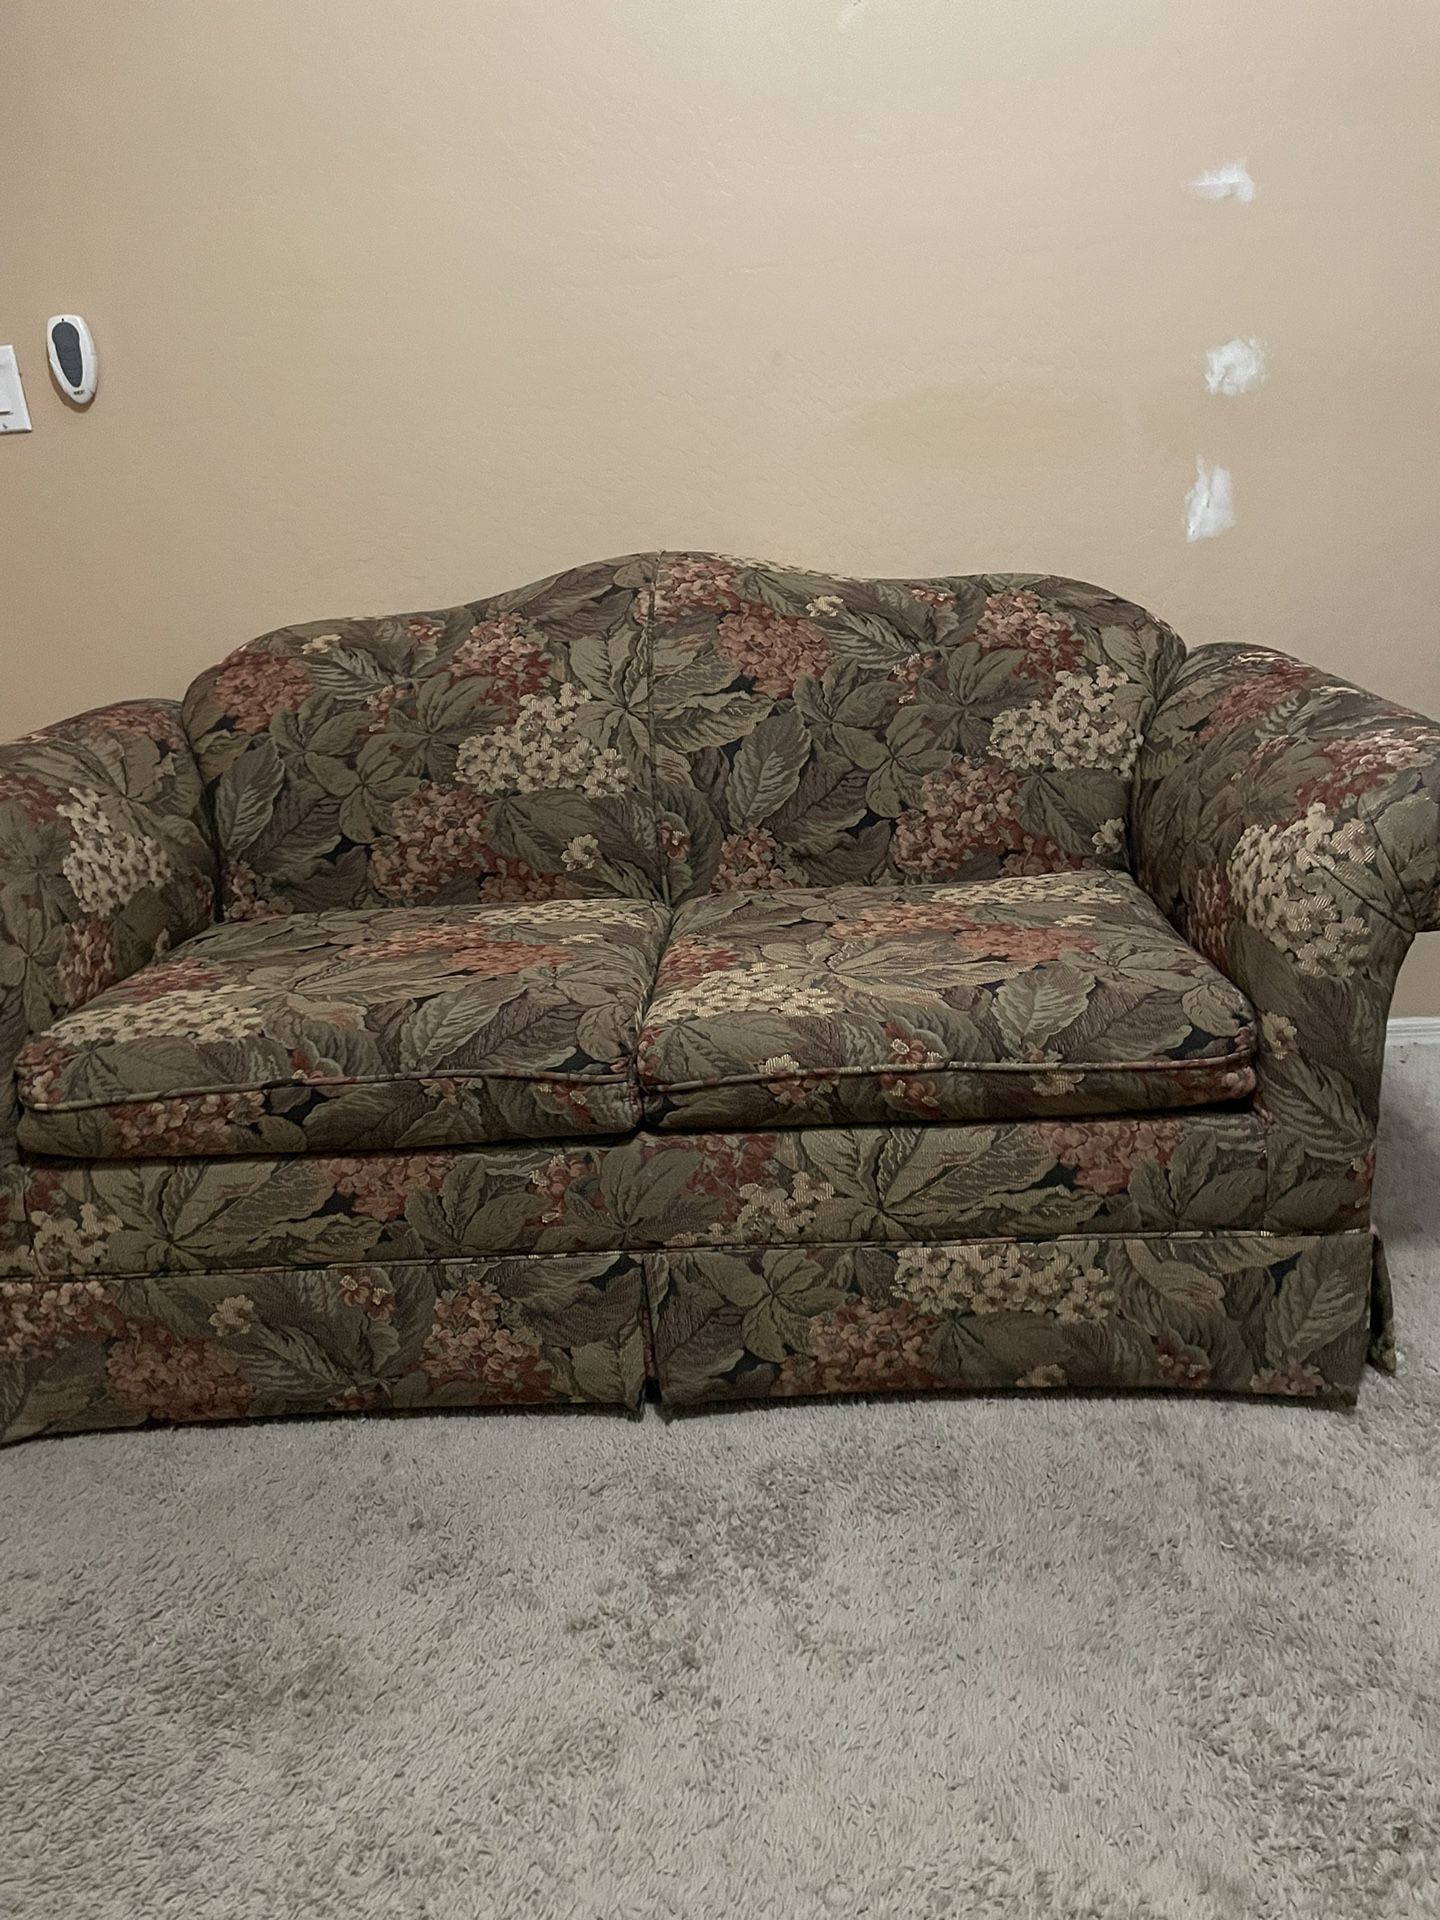 $175 Love Seat In Very Good Condition 